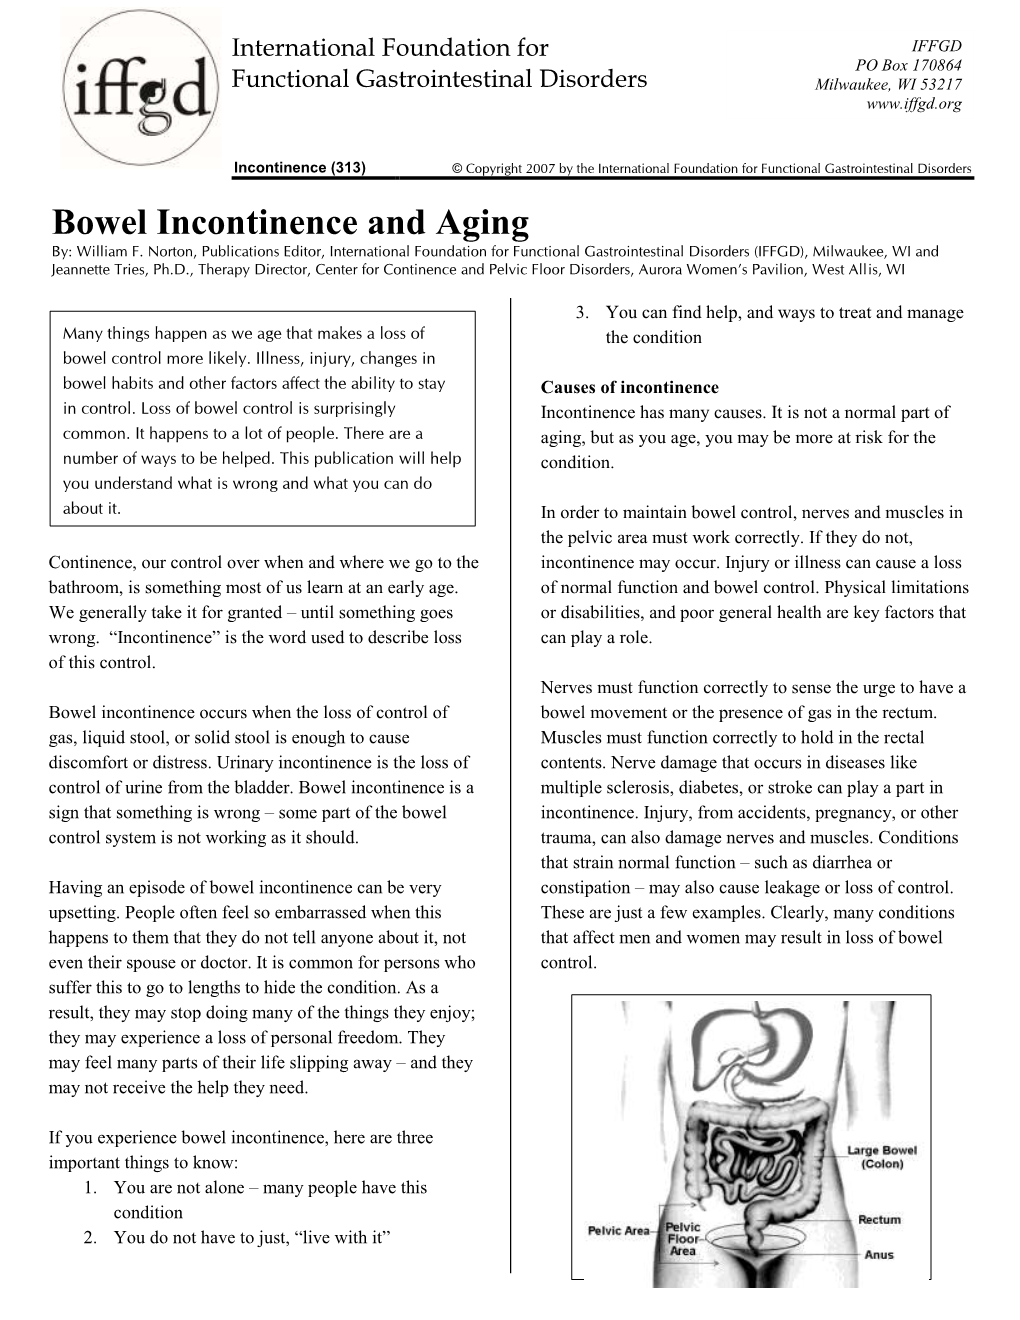 Bowel Incontinence and Aging By: William F